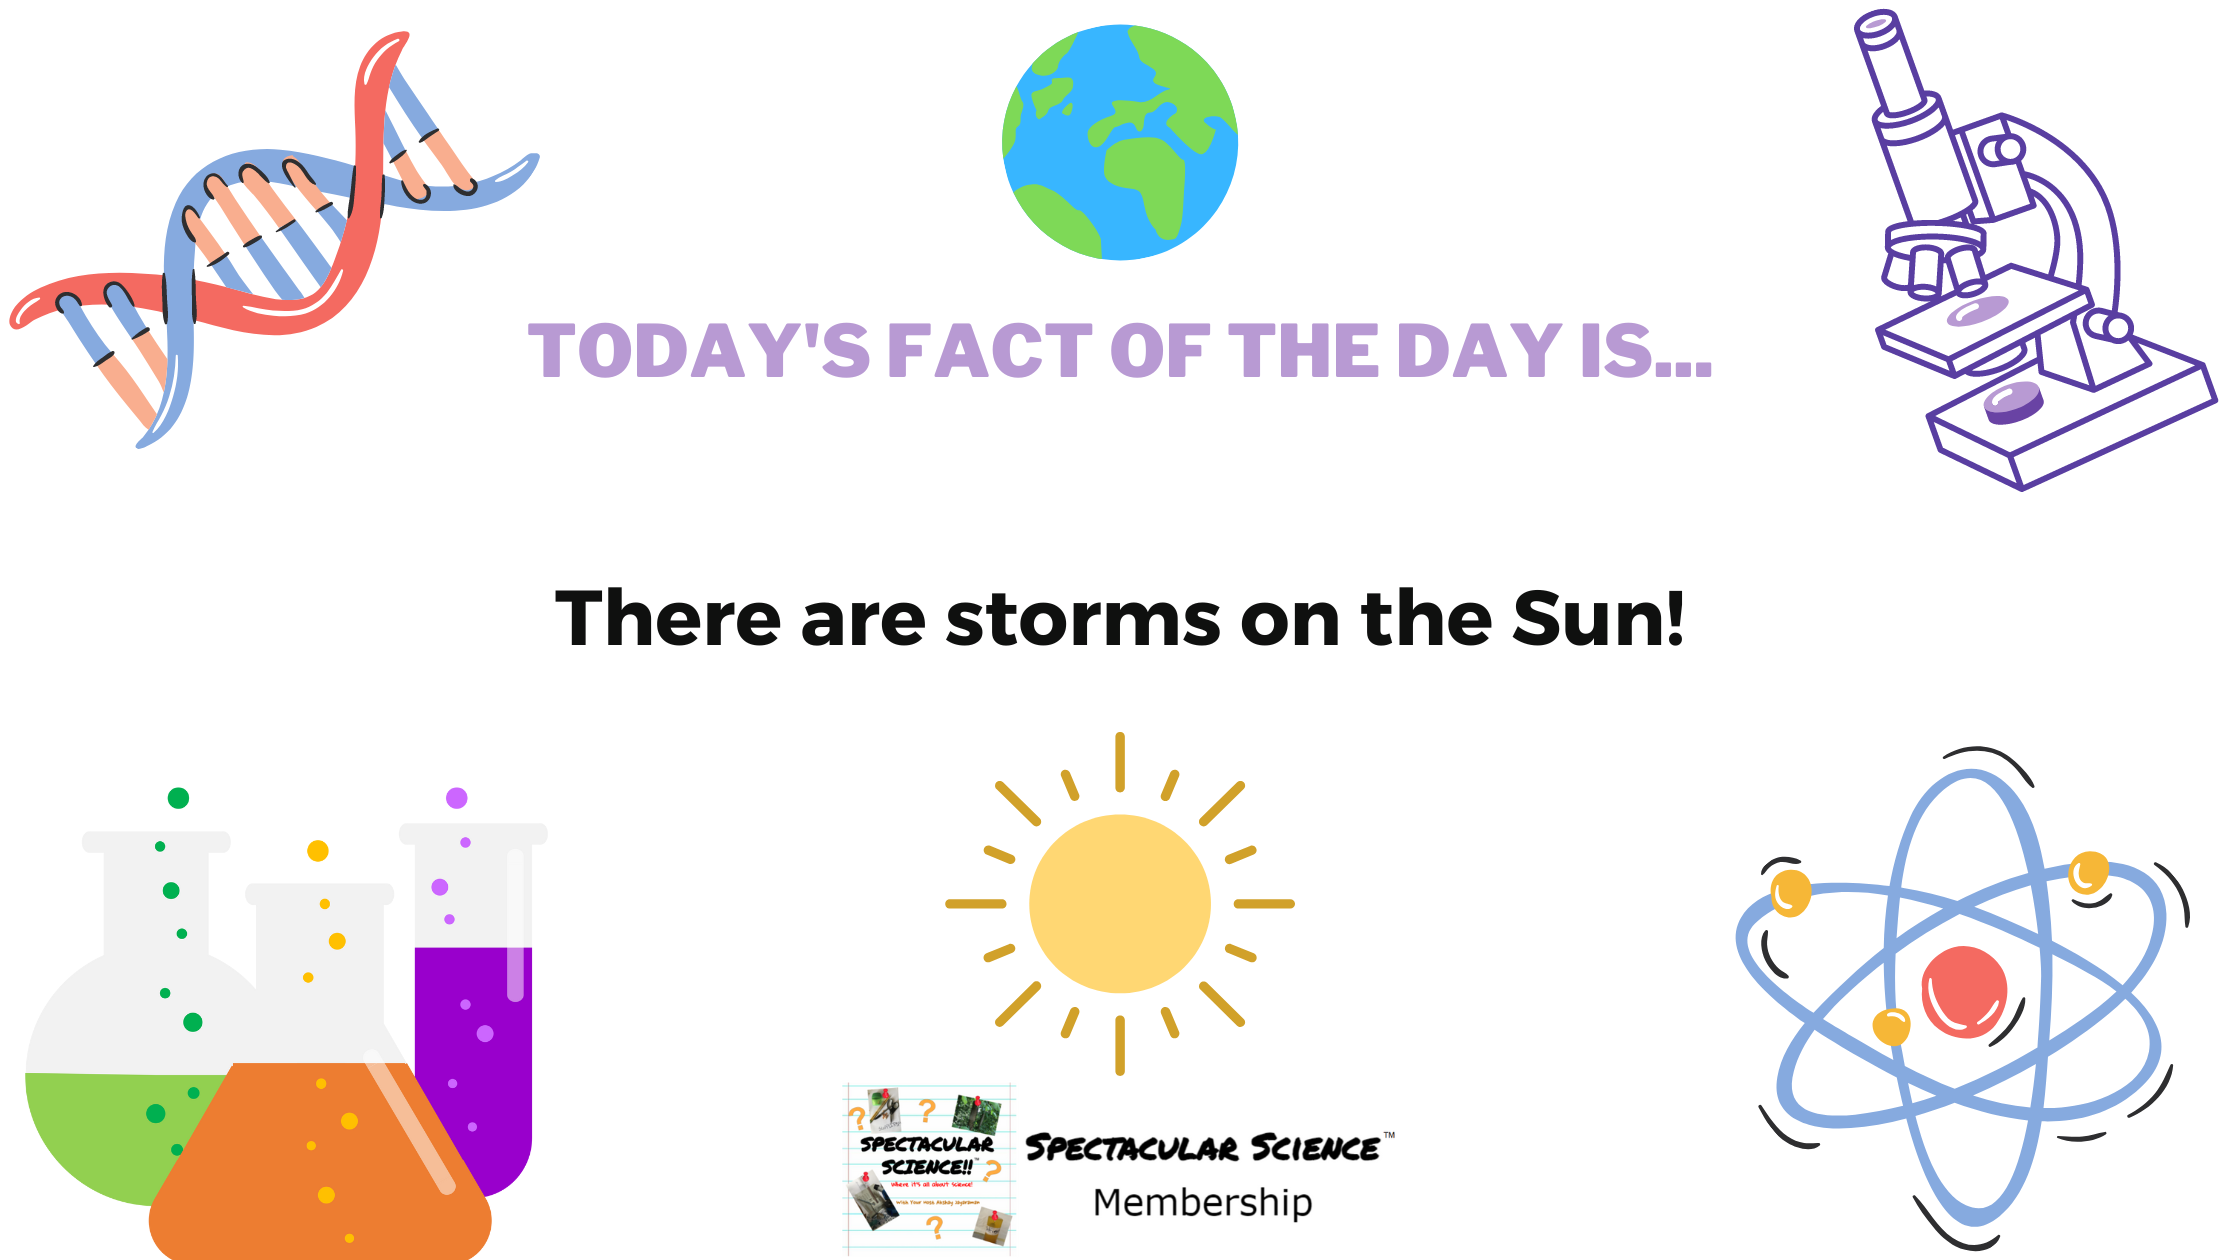 Fact of the Day Image July 18th